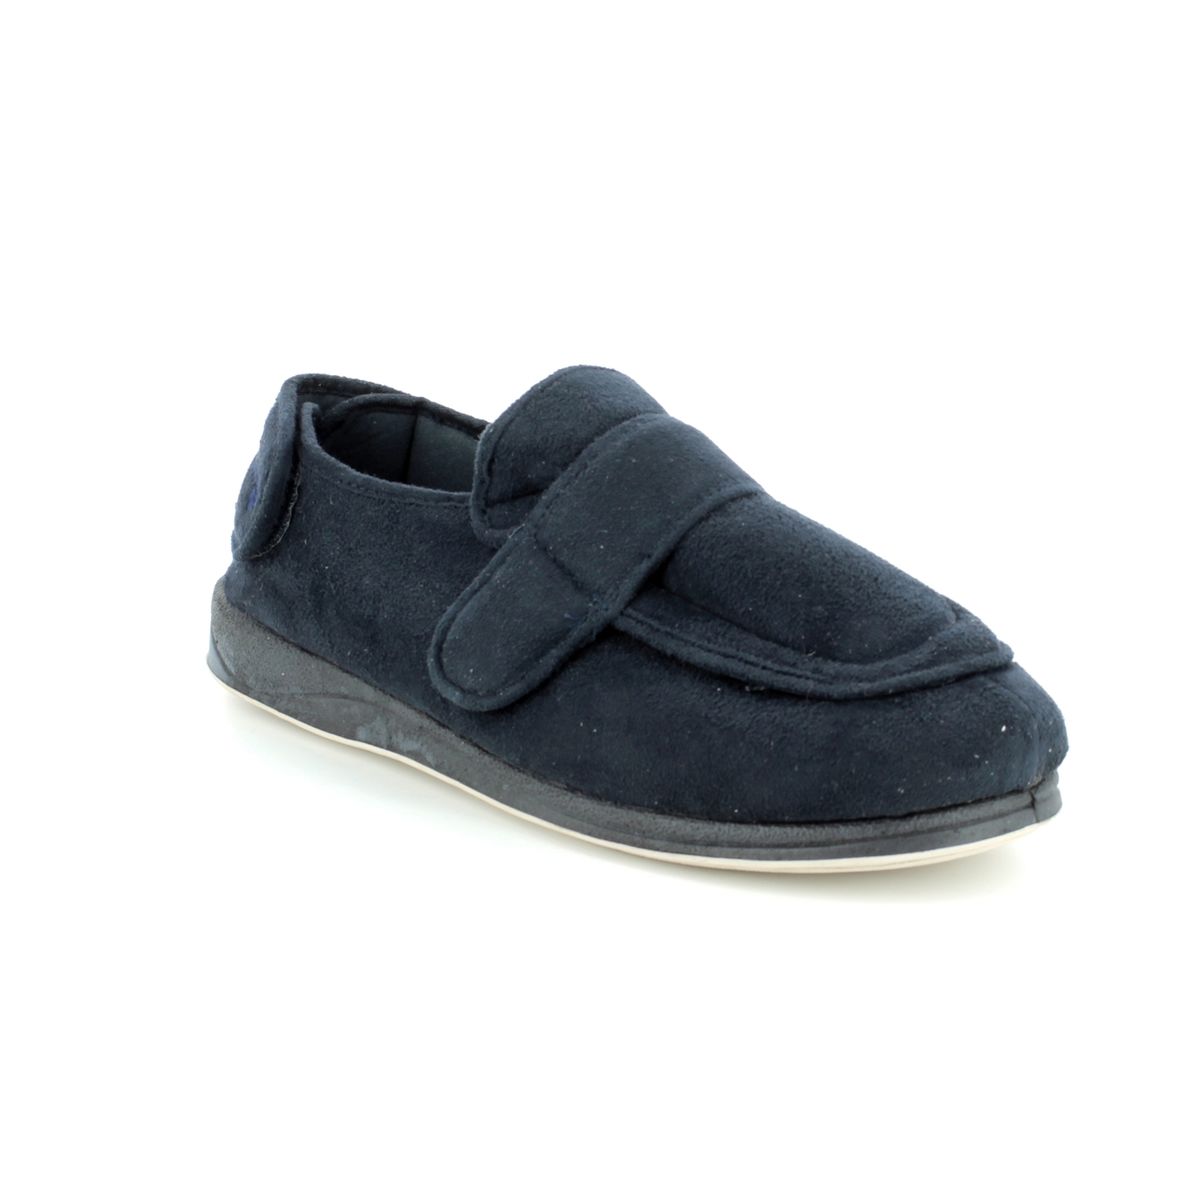 Padders Wrap Enfold G Fit Navy Mens slippers 429-24 in a Plain Microsuede in Size 8